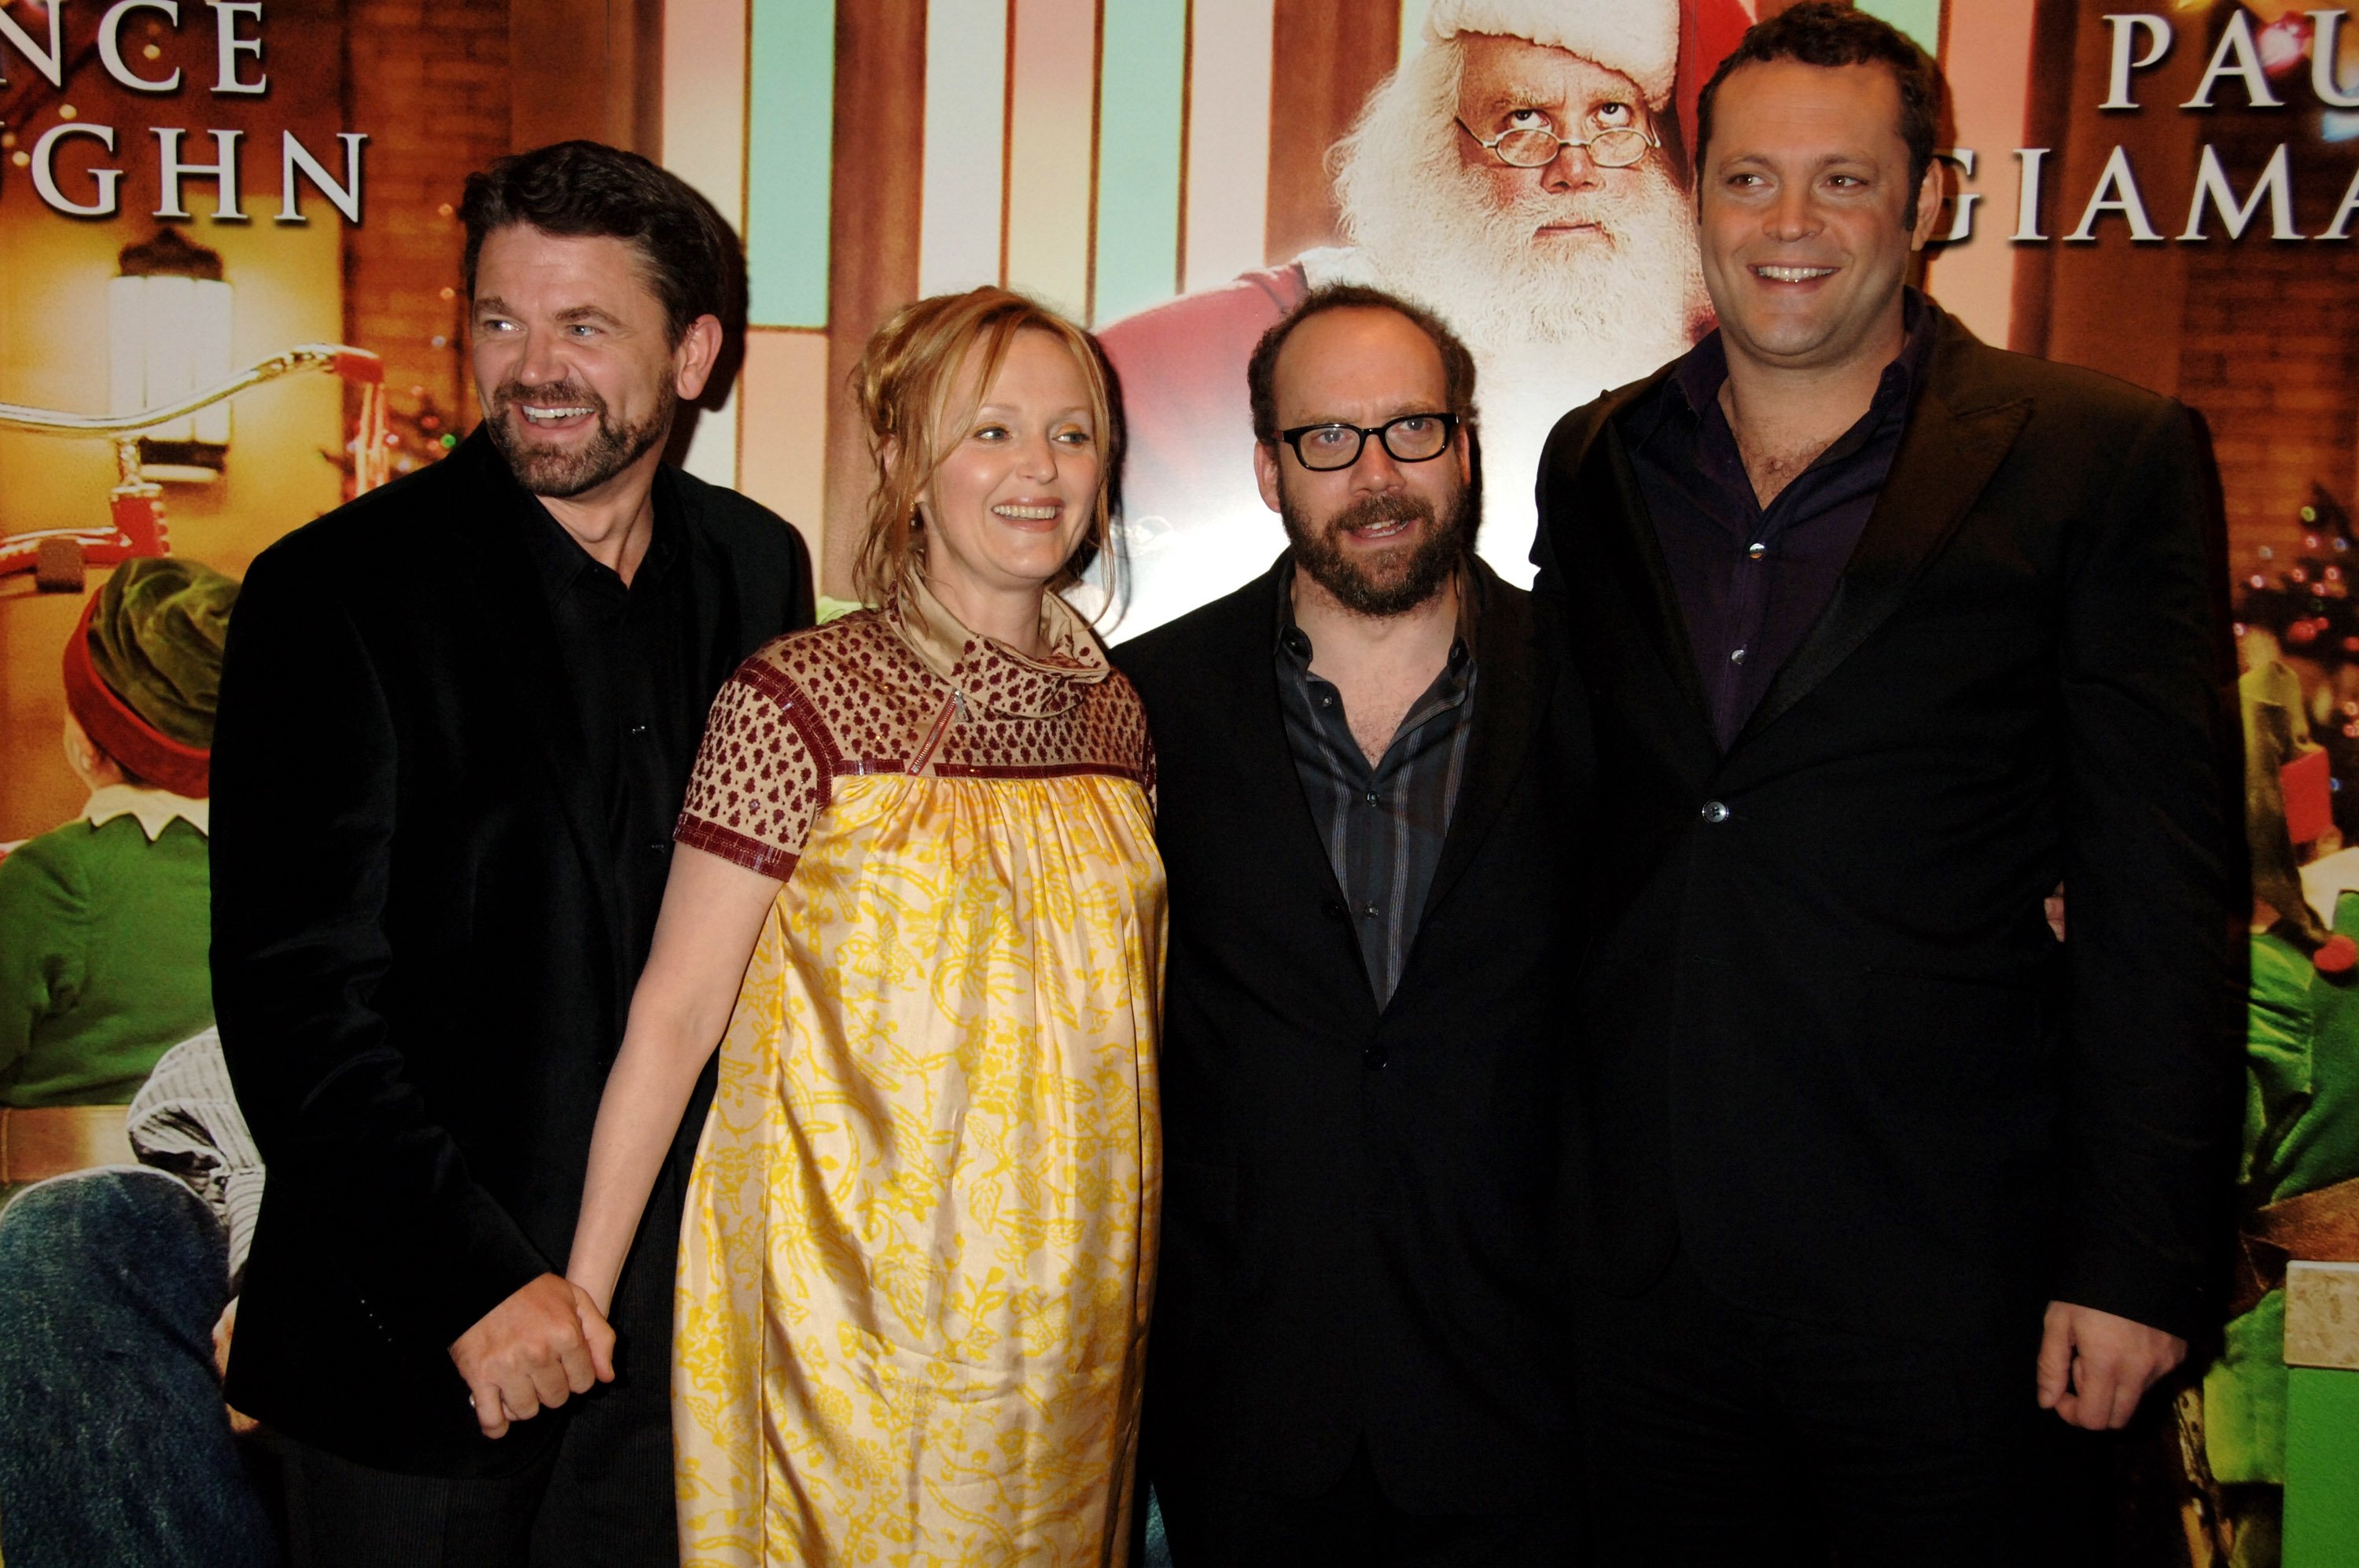 John Michael Higgins, Miranda Richardson, Paul Giamatti and Vince Vaughn attend the European premiere of "Fred Claus," at the Empire Cinema on November 19, 2007, in London, England. | Source: Getty Images